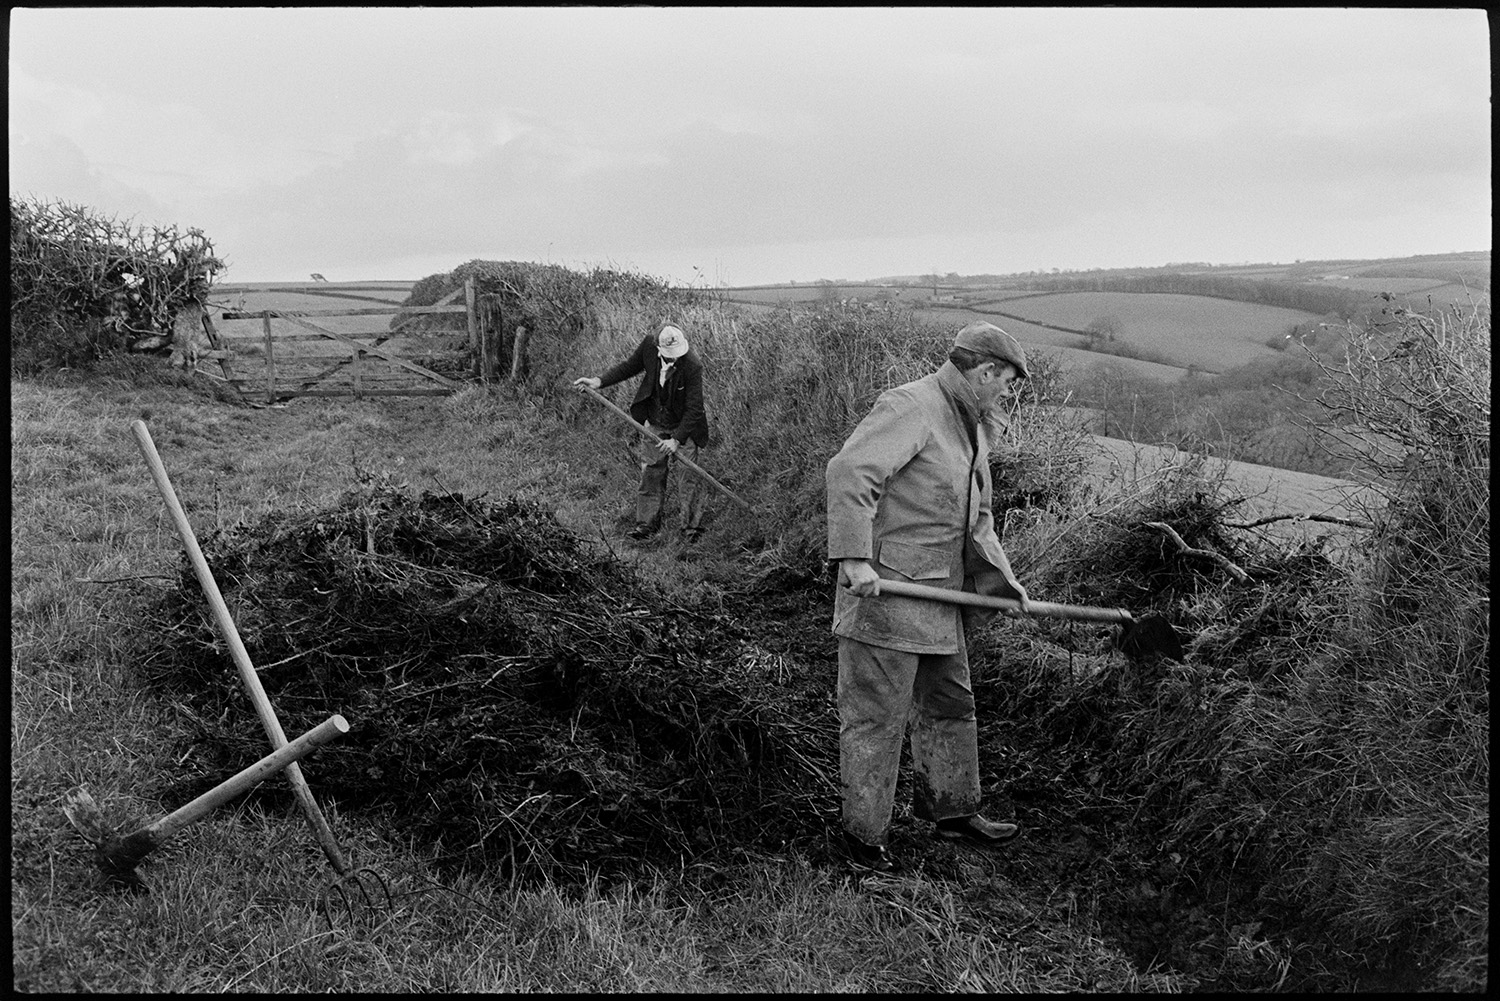 Farmers repairing hedge bank, clatting. 
[Two men clatting  a hedge (building up the hedge with turf) in a field at Narracott, Hollocombe. A fork and pickaxe are visible in the foreground by a pile of brambles, and a wooden field gate can be seen in the background.]